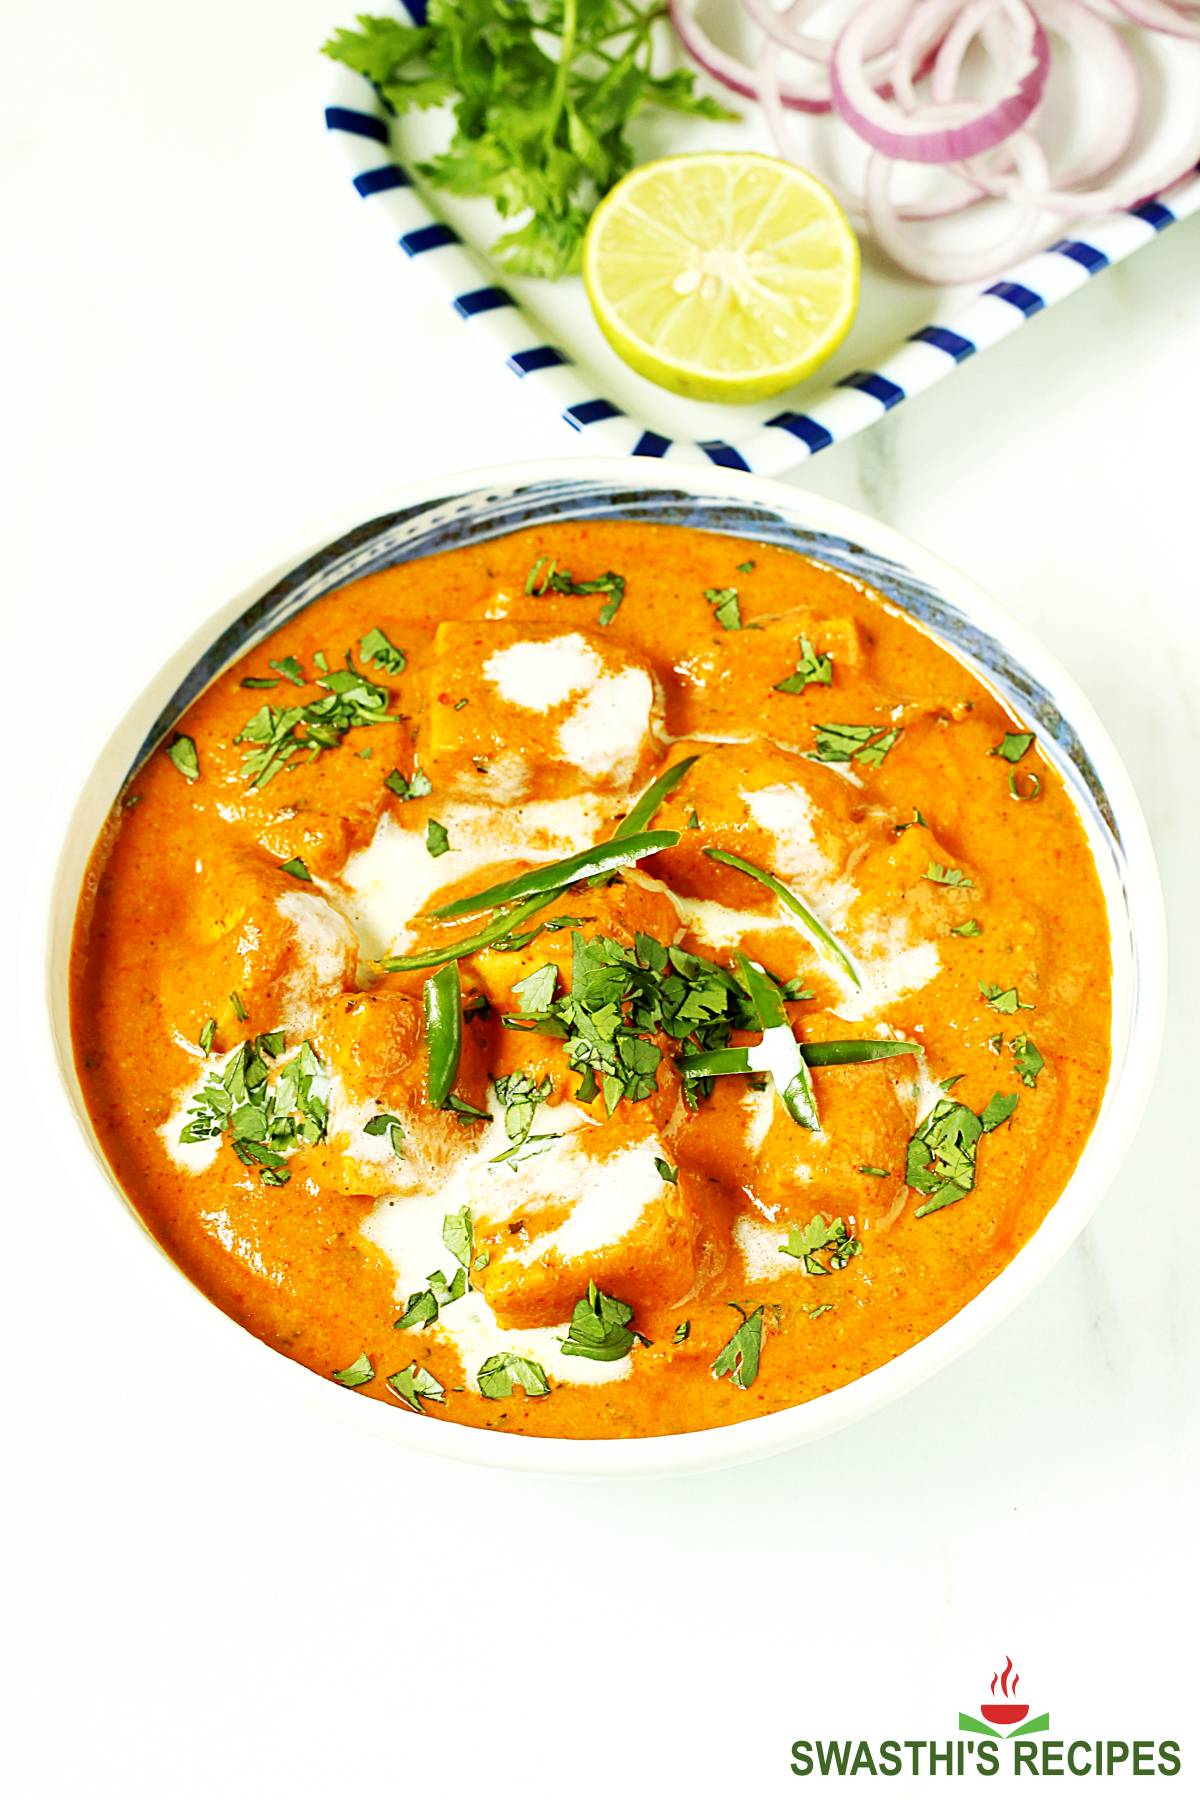 Paneer recipes - Collection of recipes with paneer